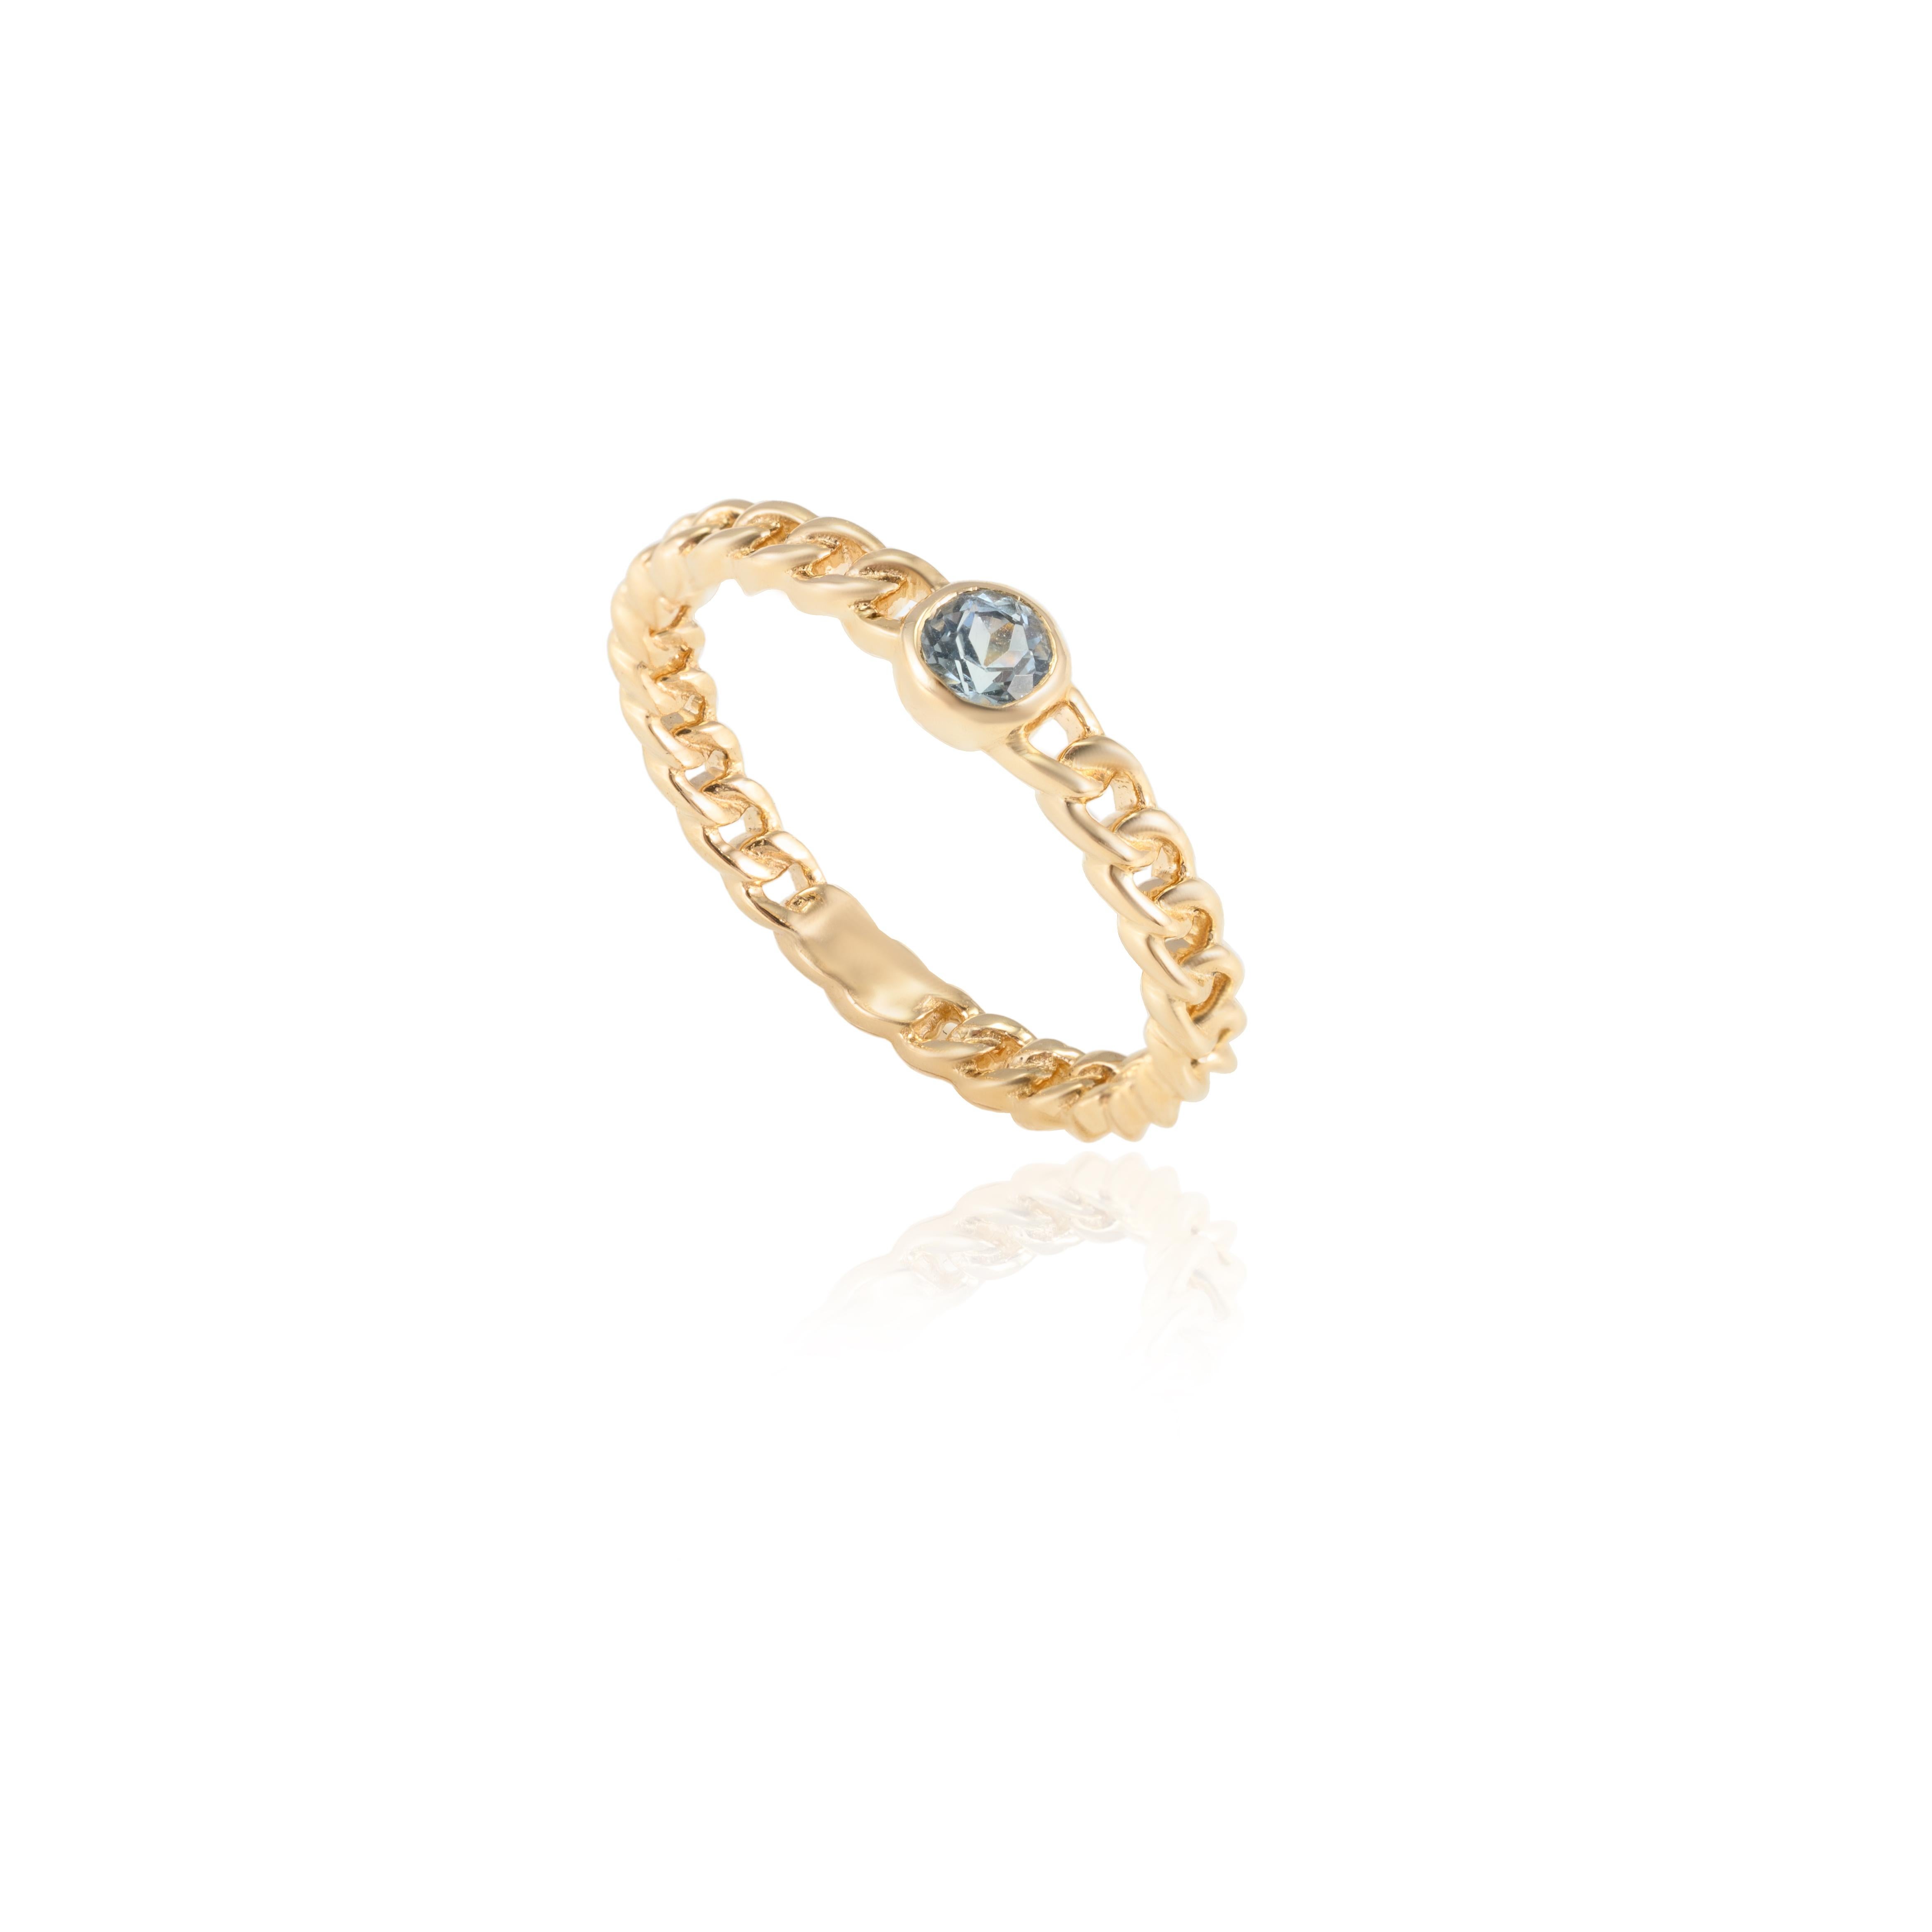 For Sale:  Everyday Blue Topaz Solitaire Curb Chain Ring in 14k Solid Yellow Gold For Her 5